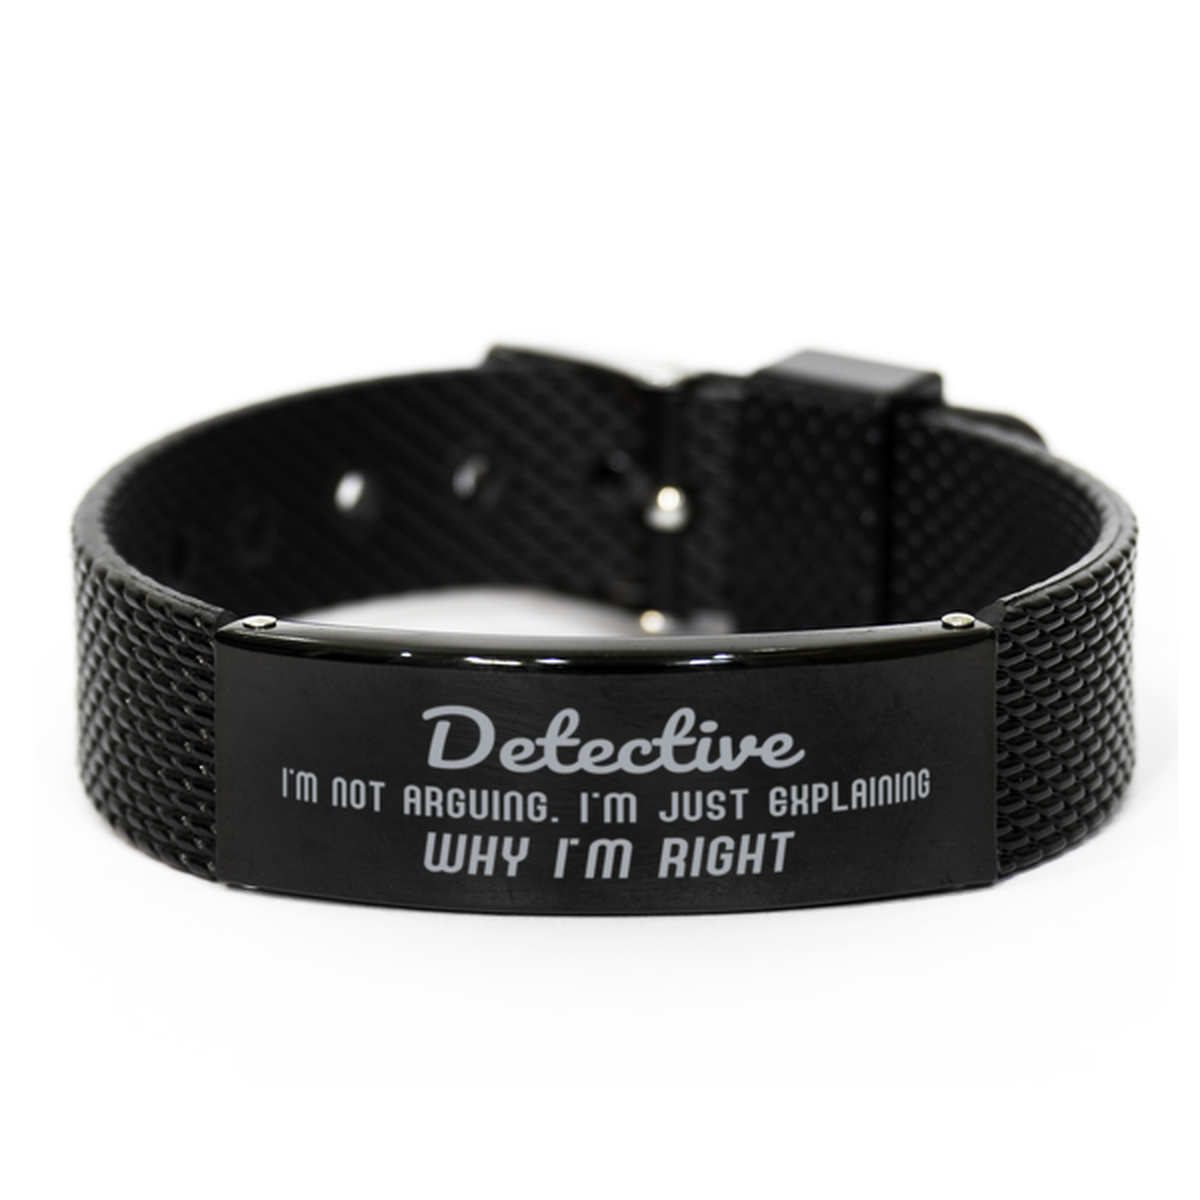 Detective I'm not Arguing. I'm Just Explaining Why I'm RIGHT Black Shark Mesh Bracelet, Funny Saying Quote Detective Gifts For Detective Graduation Birthday Christmas Gifts for Men Women Coworker